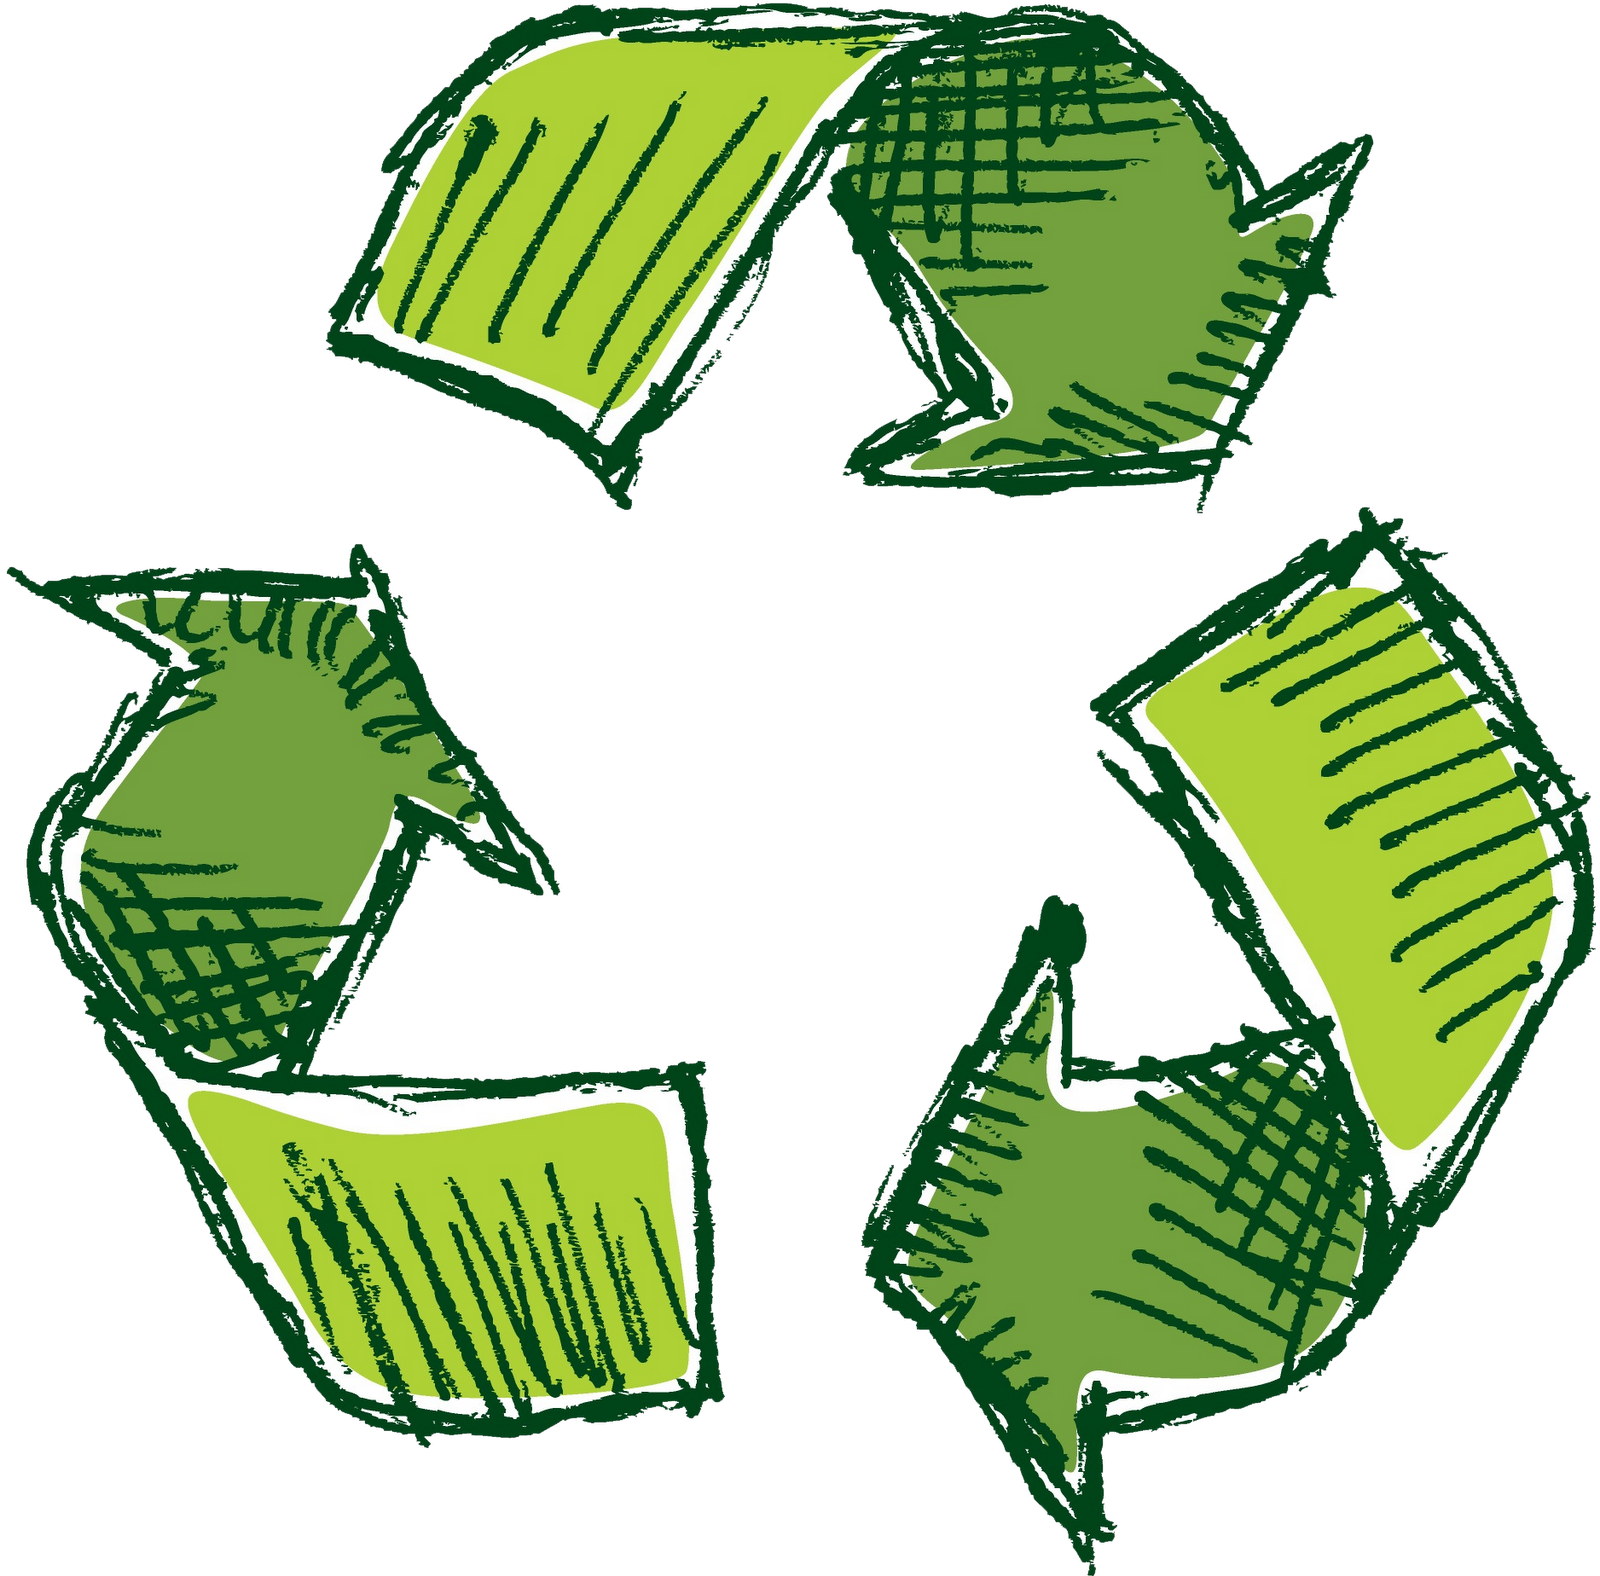 Landfill Recycle Symbol Recycling Download HQ PNG PNG Image